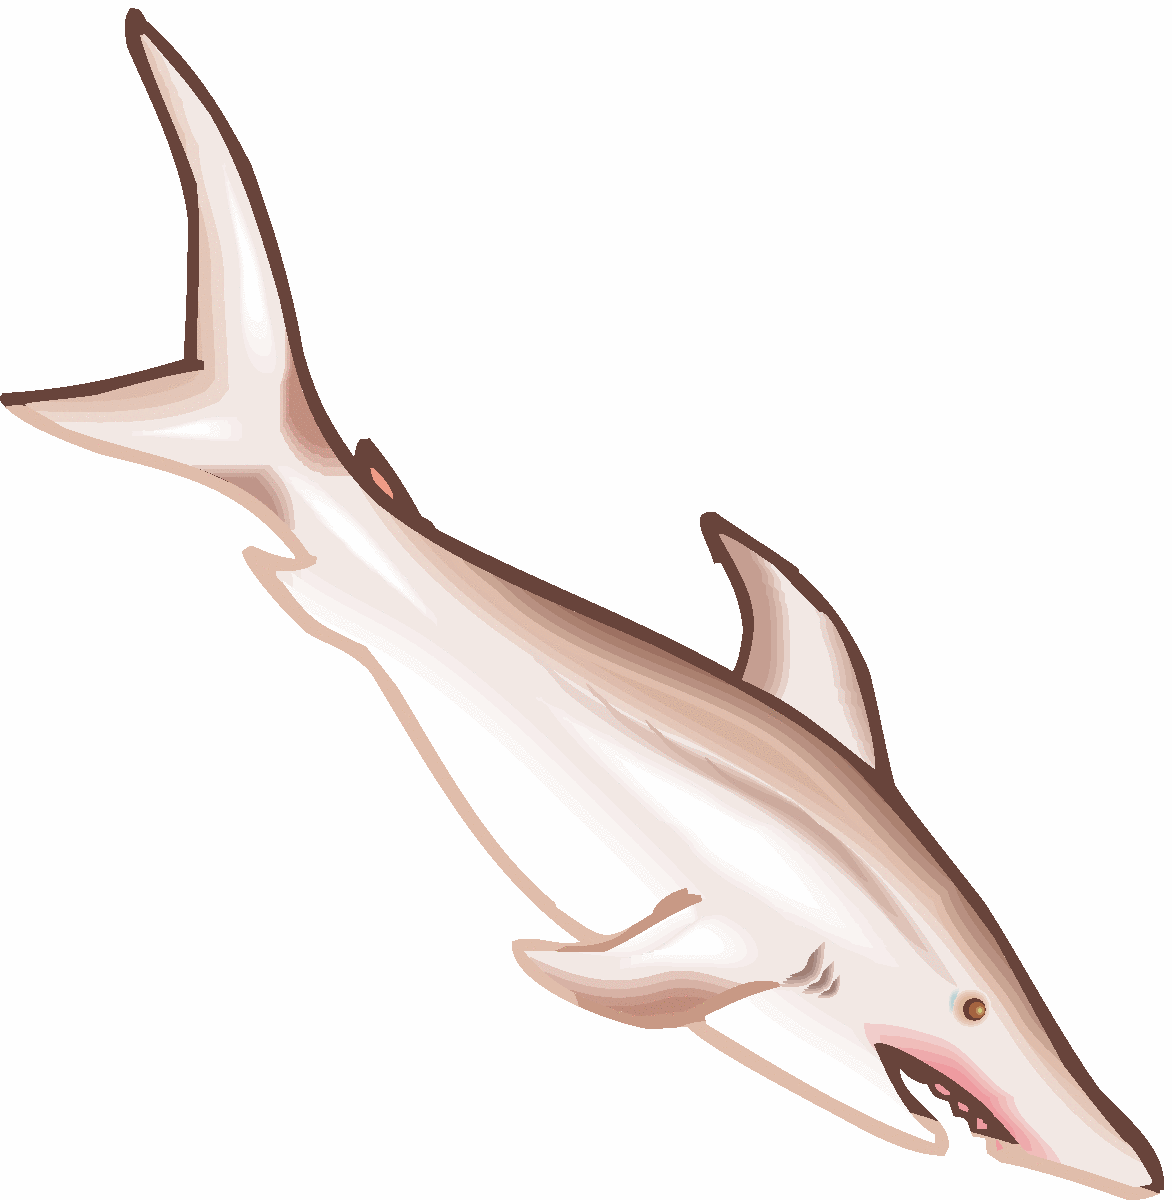 Click The Shark Clipart Image To See A Larger Version Of The Graphic